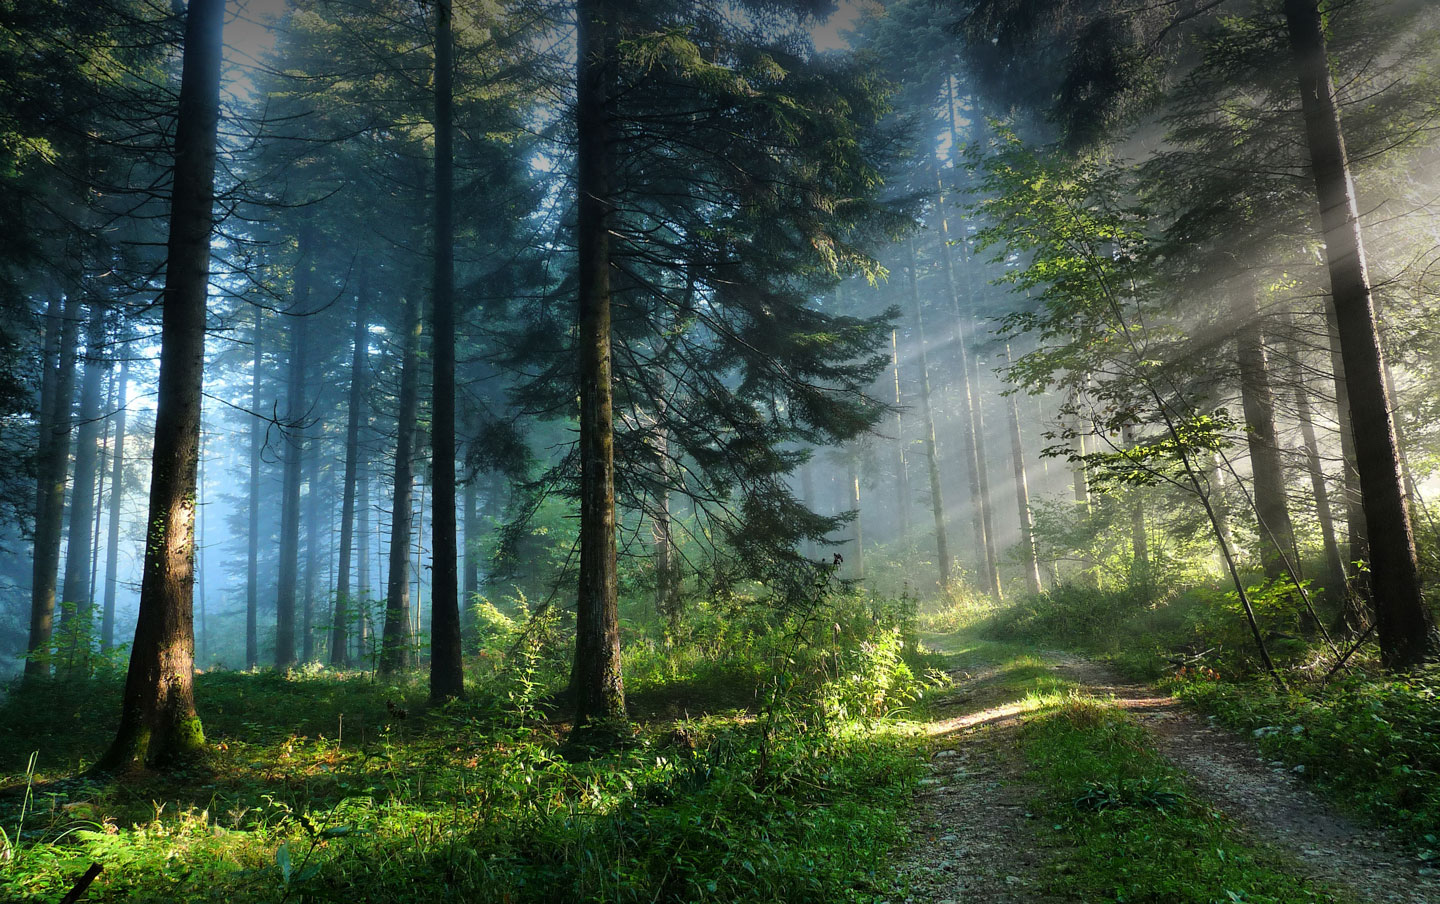 Sunlight filtering through tall trees onto a forest path.